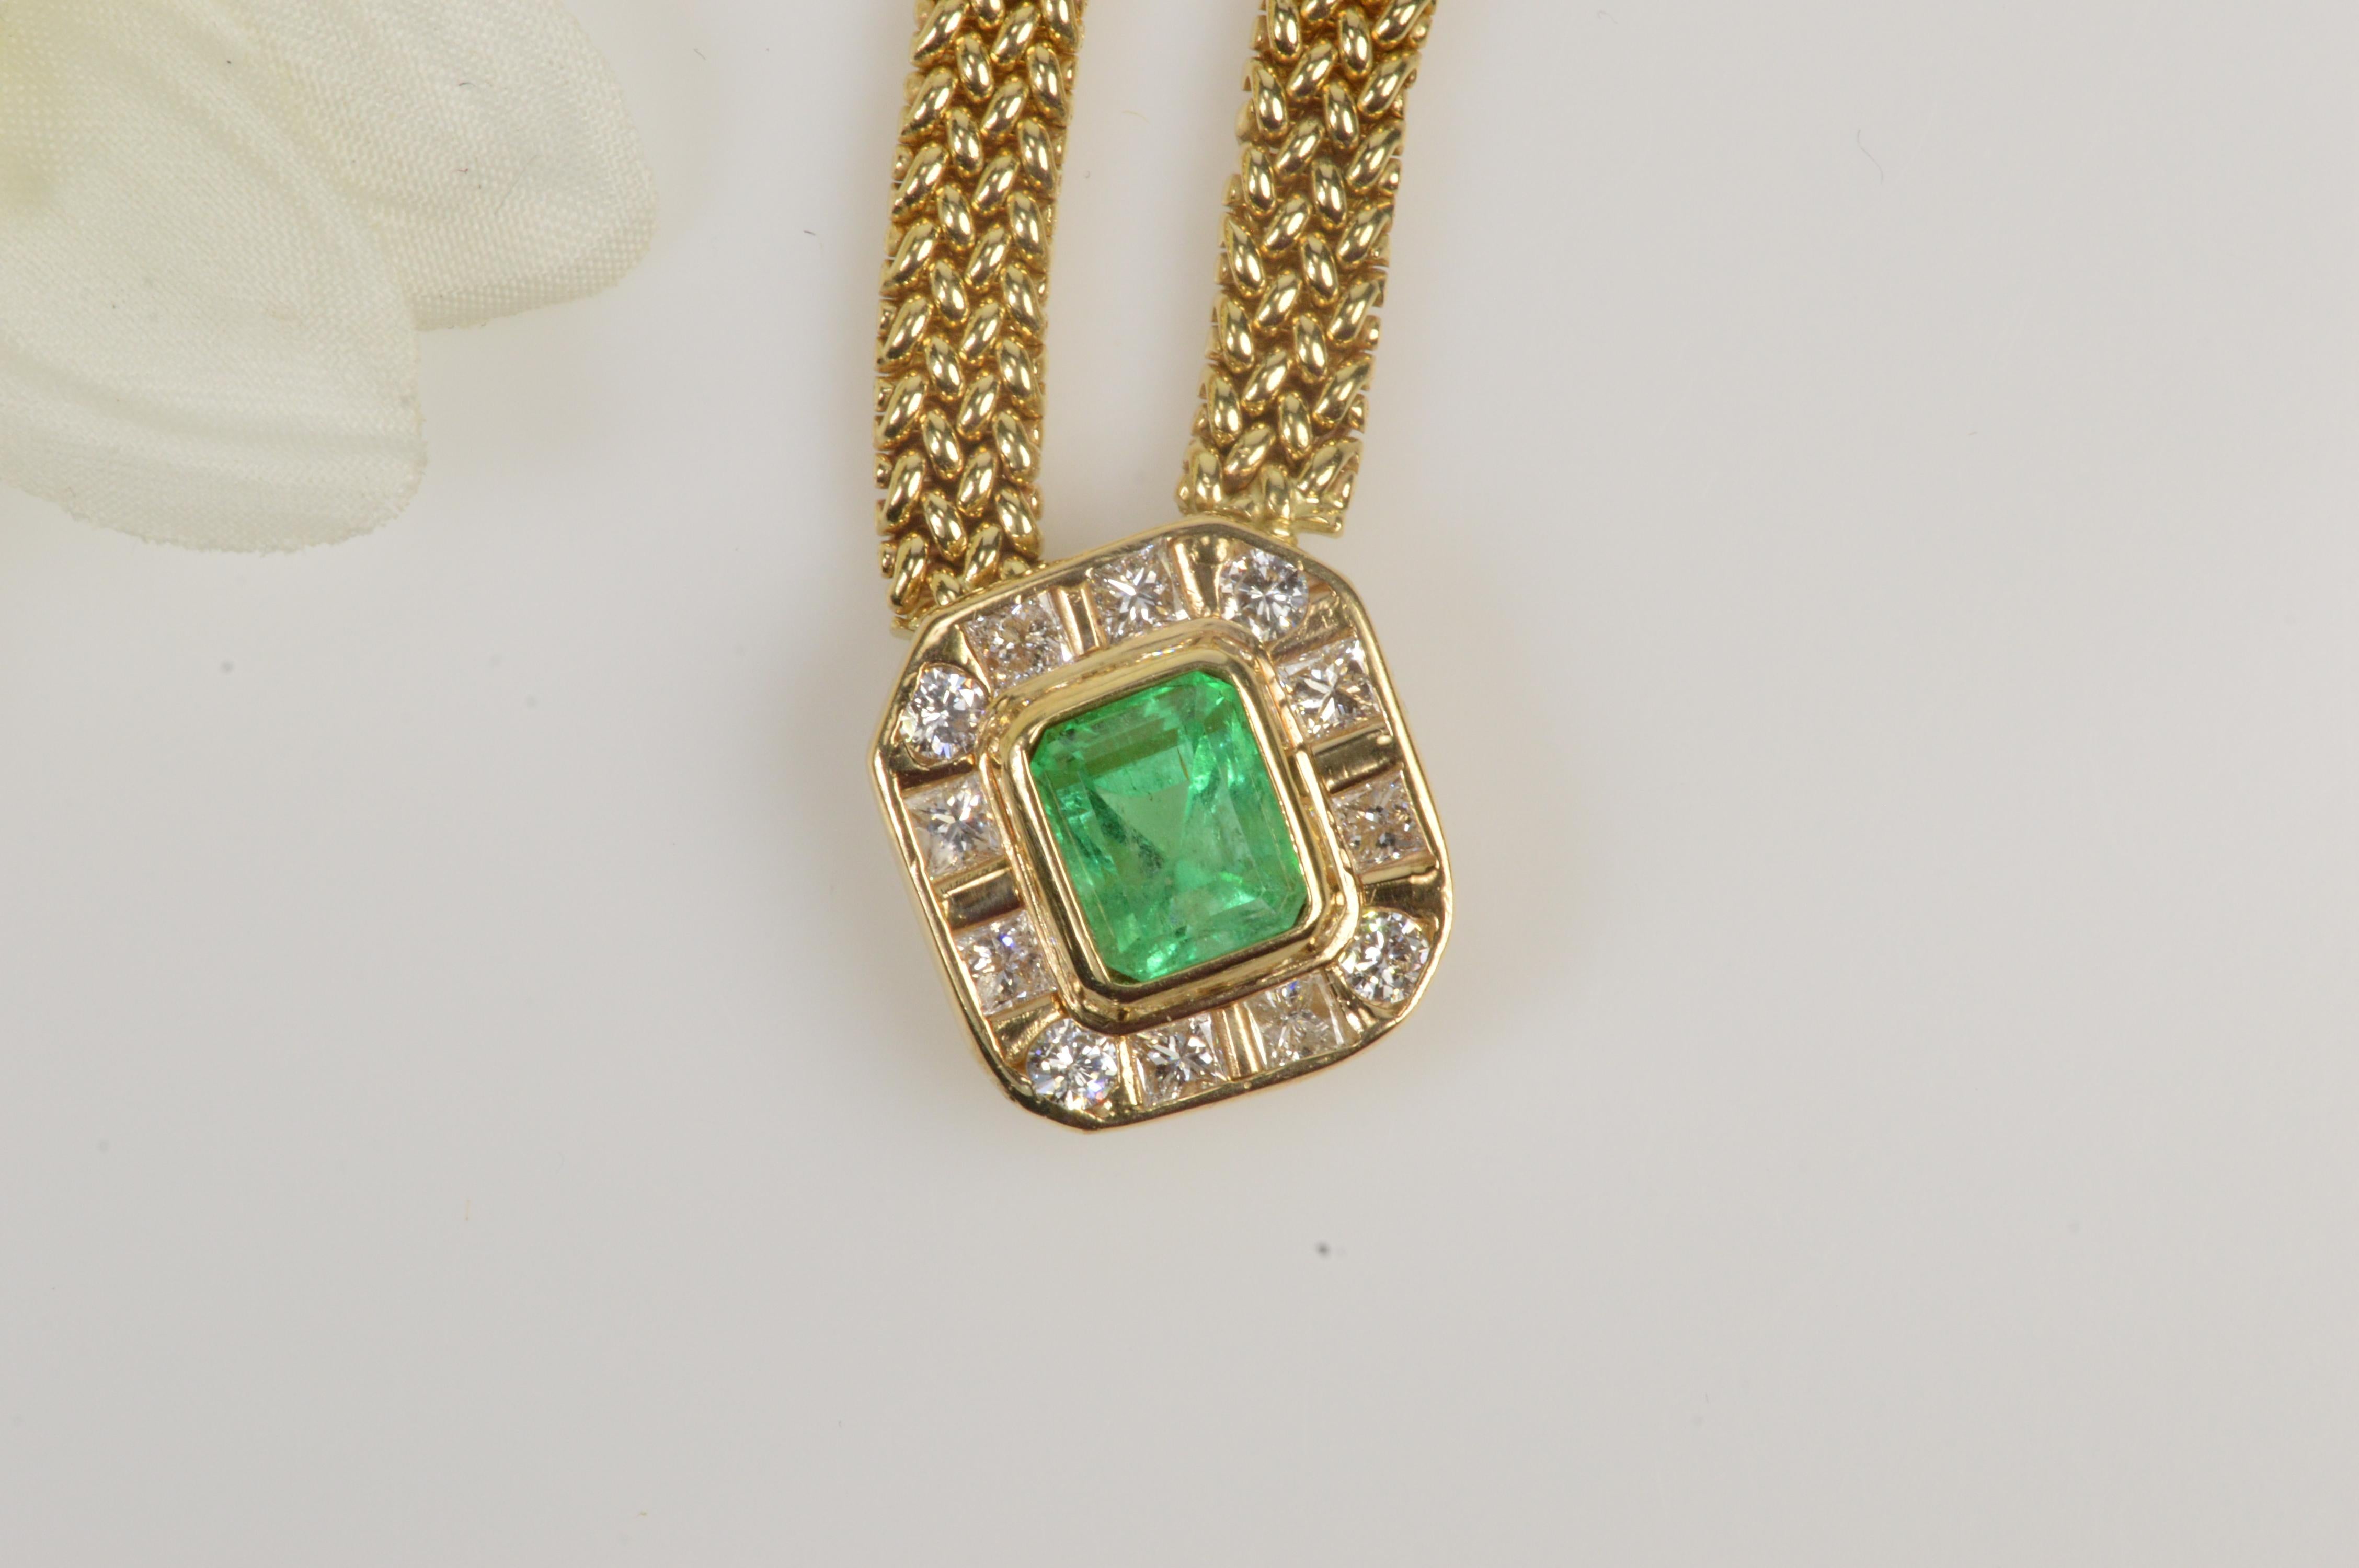 This emerald and diamond halo statement piece is sure to turn heads with its bold design and classic styling.  All diamonds are graded according to GIA grading standards  
·Item: 14K 2.91 CT Emerald 0.88 CTW Diamond Halo Pendant Link Necklace 16.25